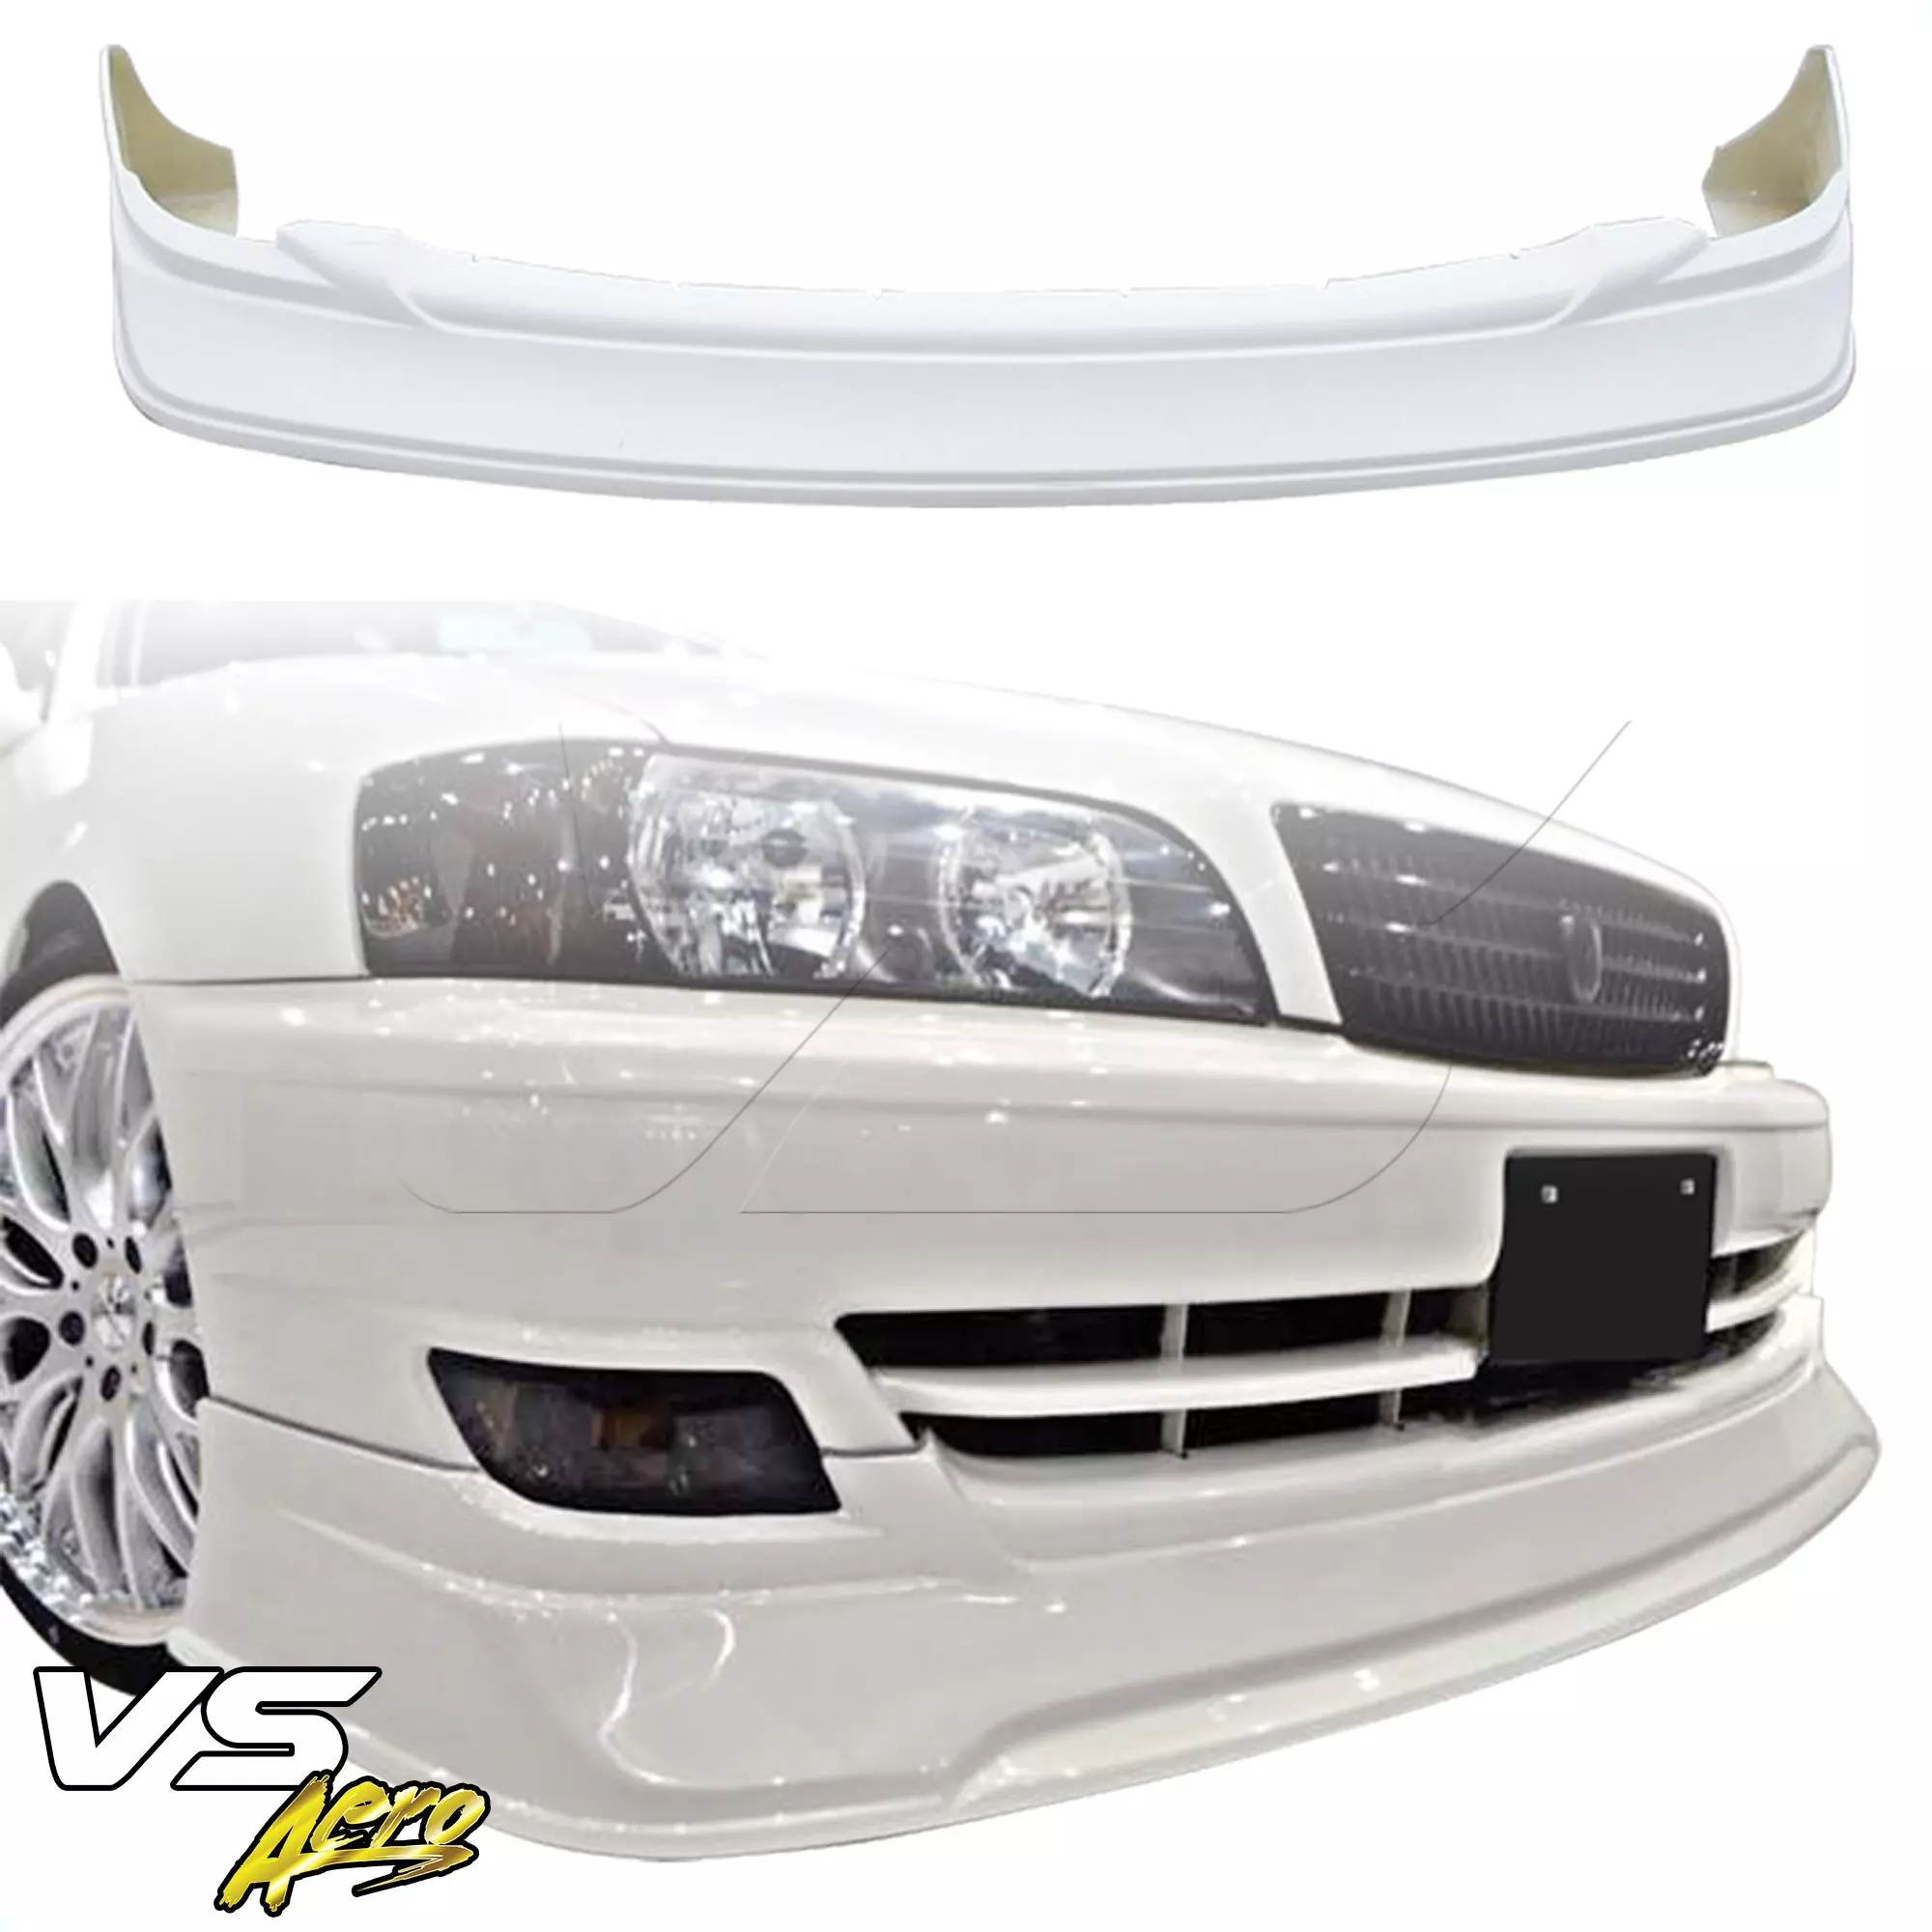 VSaero FRP TRAU Late Front Lip Valance > Toyota Chaser JZX100 1999-2000 - Image 25